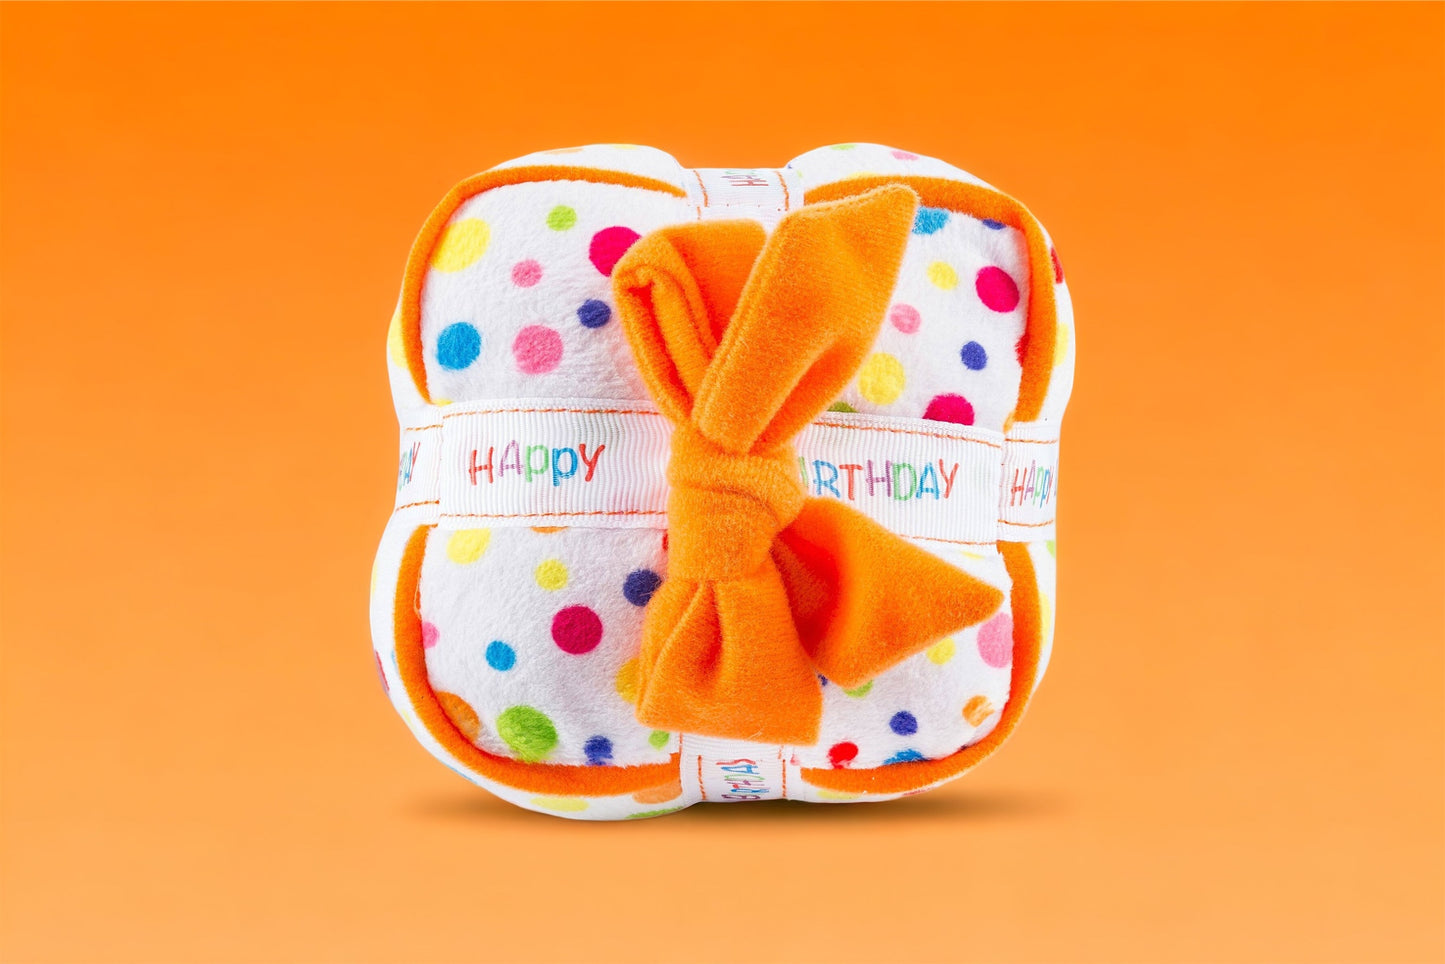 Happy Birthday “Pawty All The Time” 3 piece Squeaker Toy Set